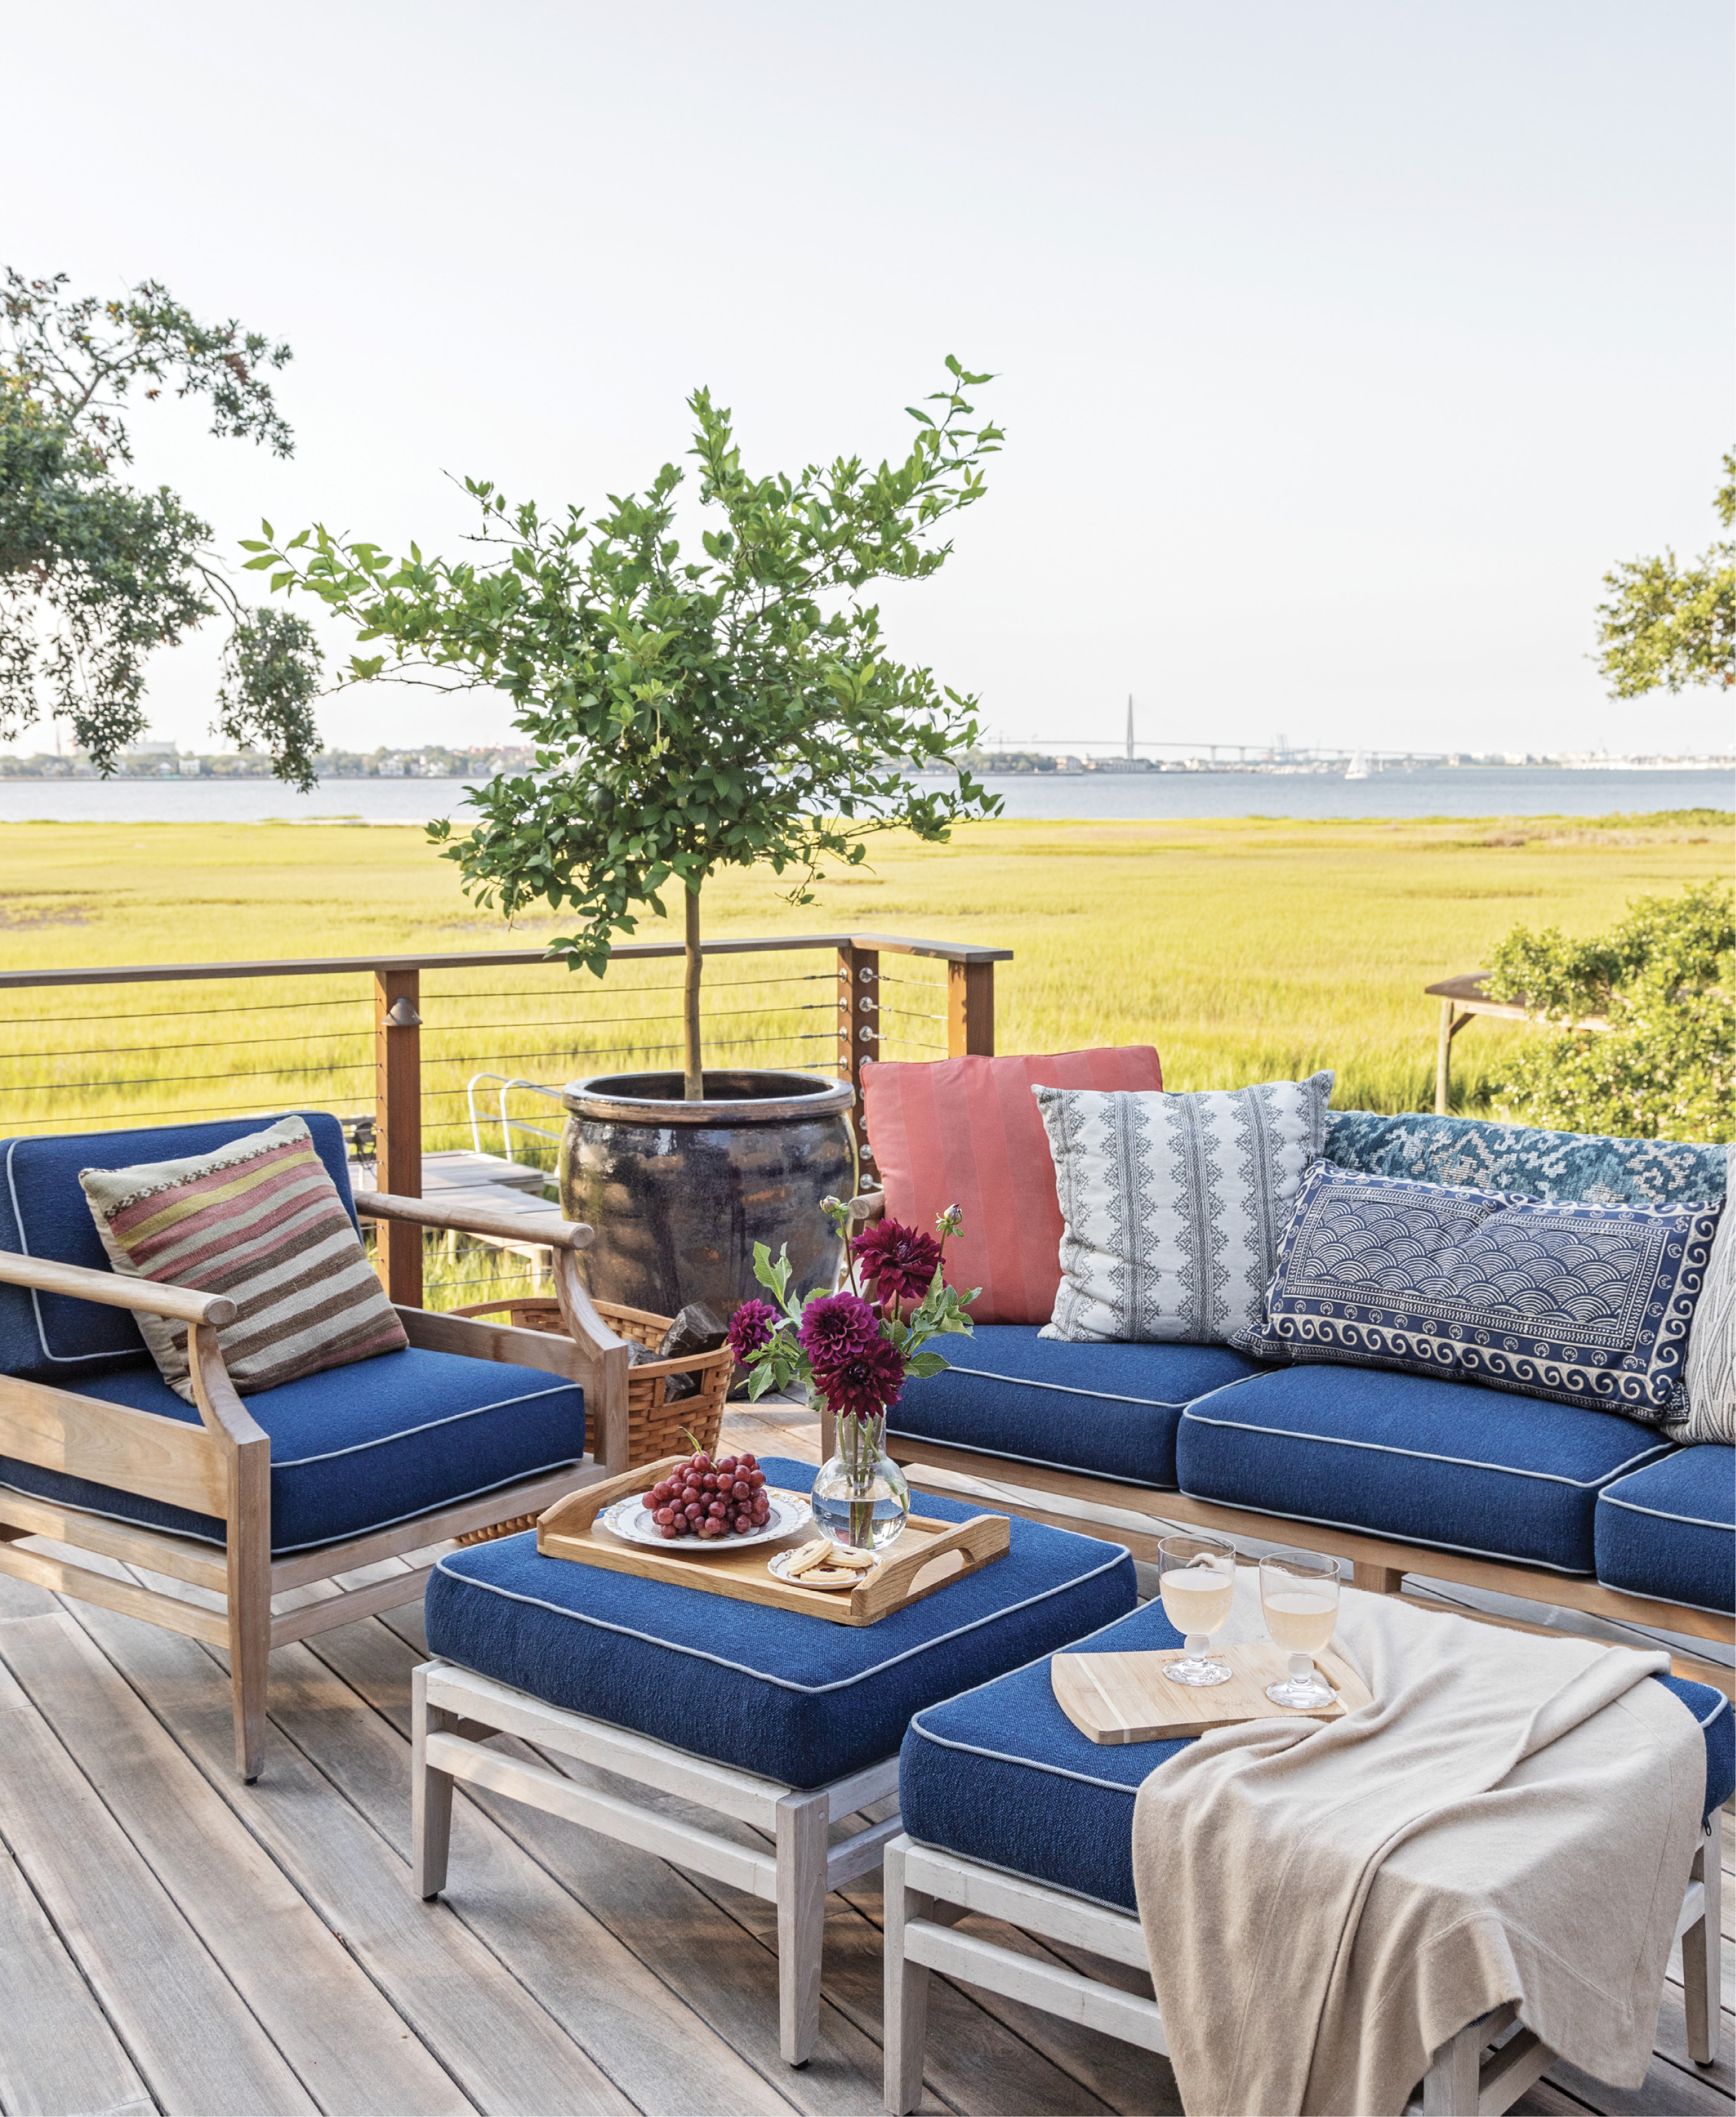 LOUNGE GOALS: The spacious deck takes full advantage of views of the Ravenel Bridge and the peninsula with ample spots to sit and soak up the scenery on comfy outdoor furniture from Frontgate or enjoy an alfresco dinner from the outdoor kitchen’s Kamado Joe ceramic cooker.